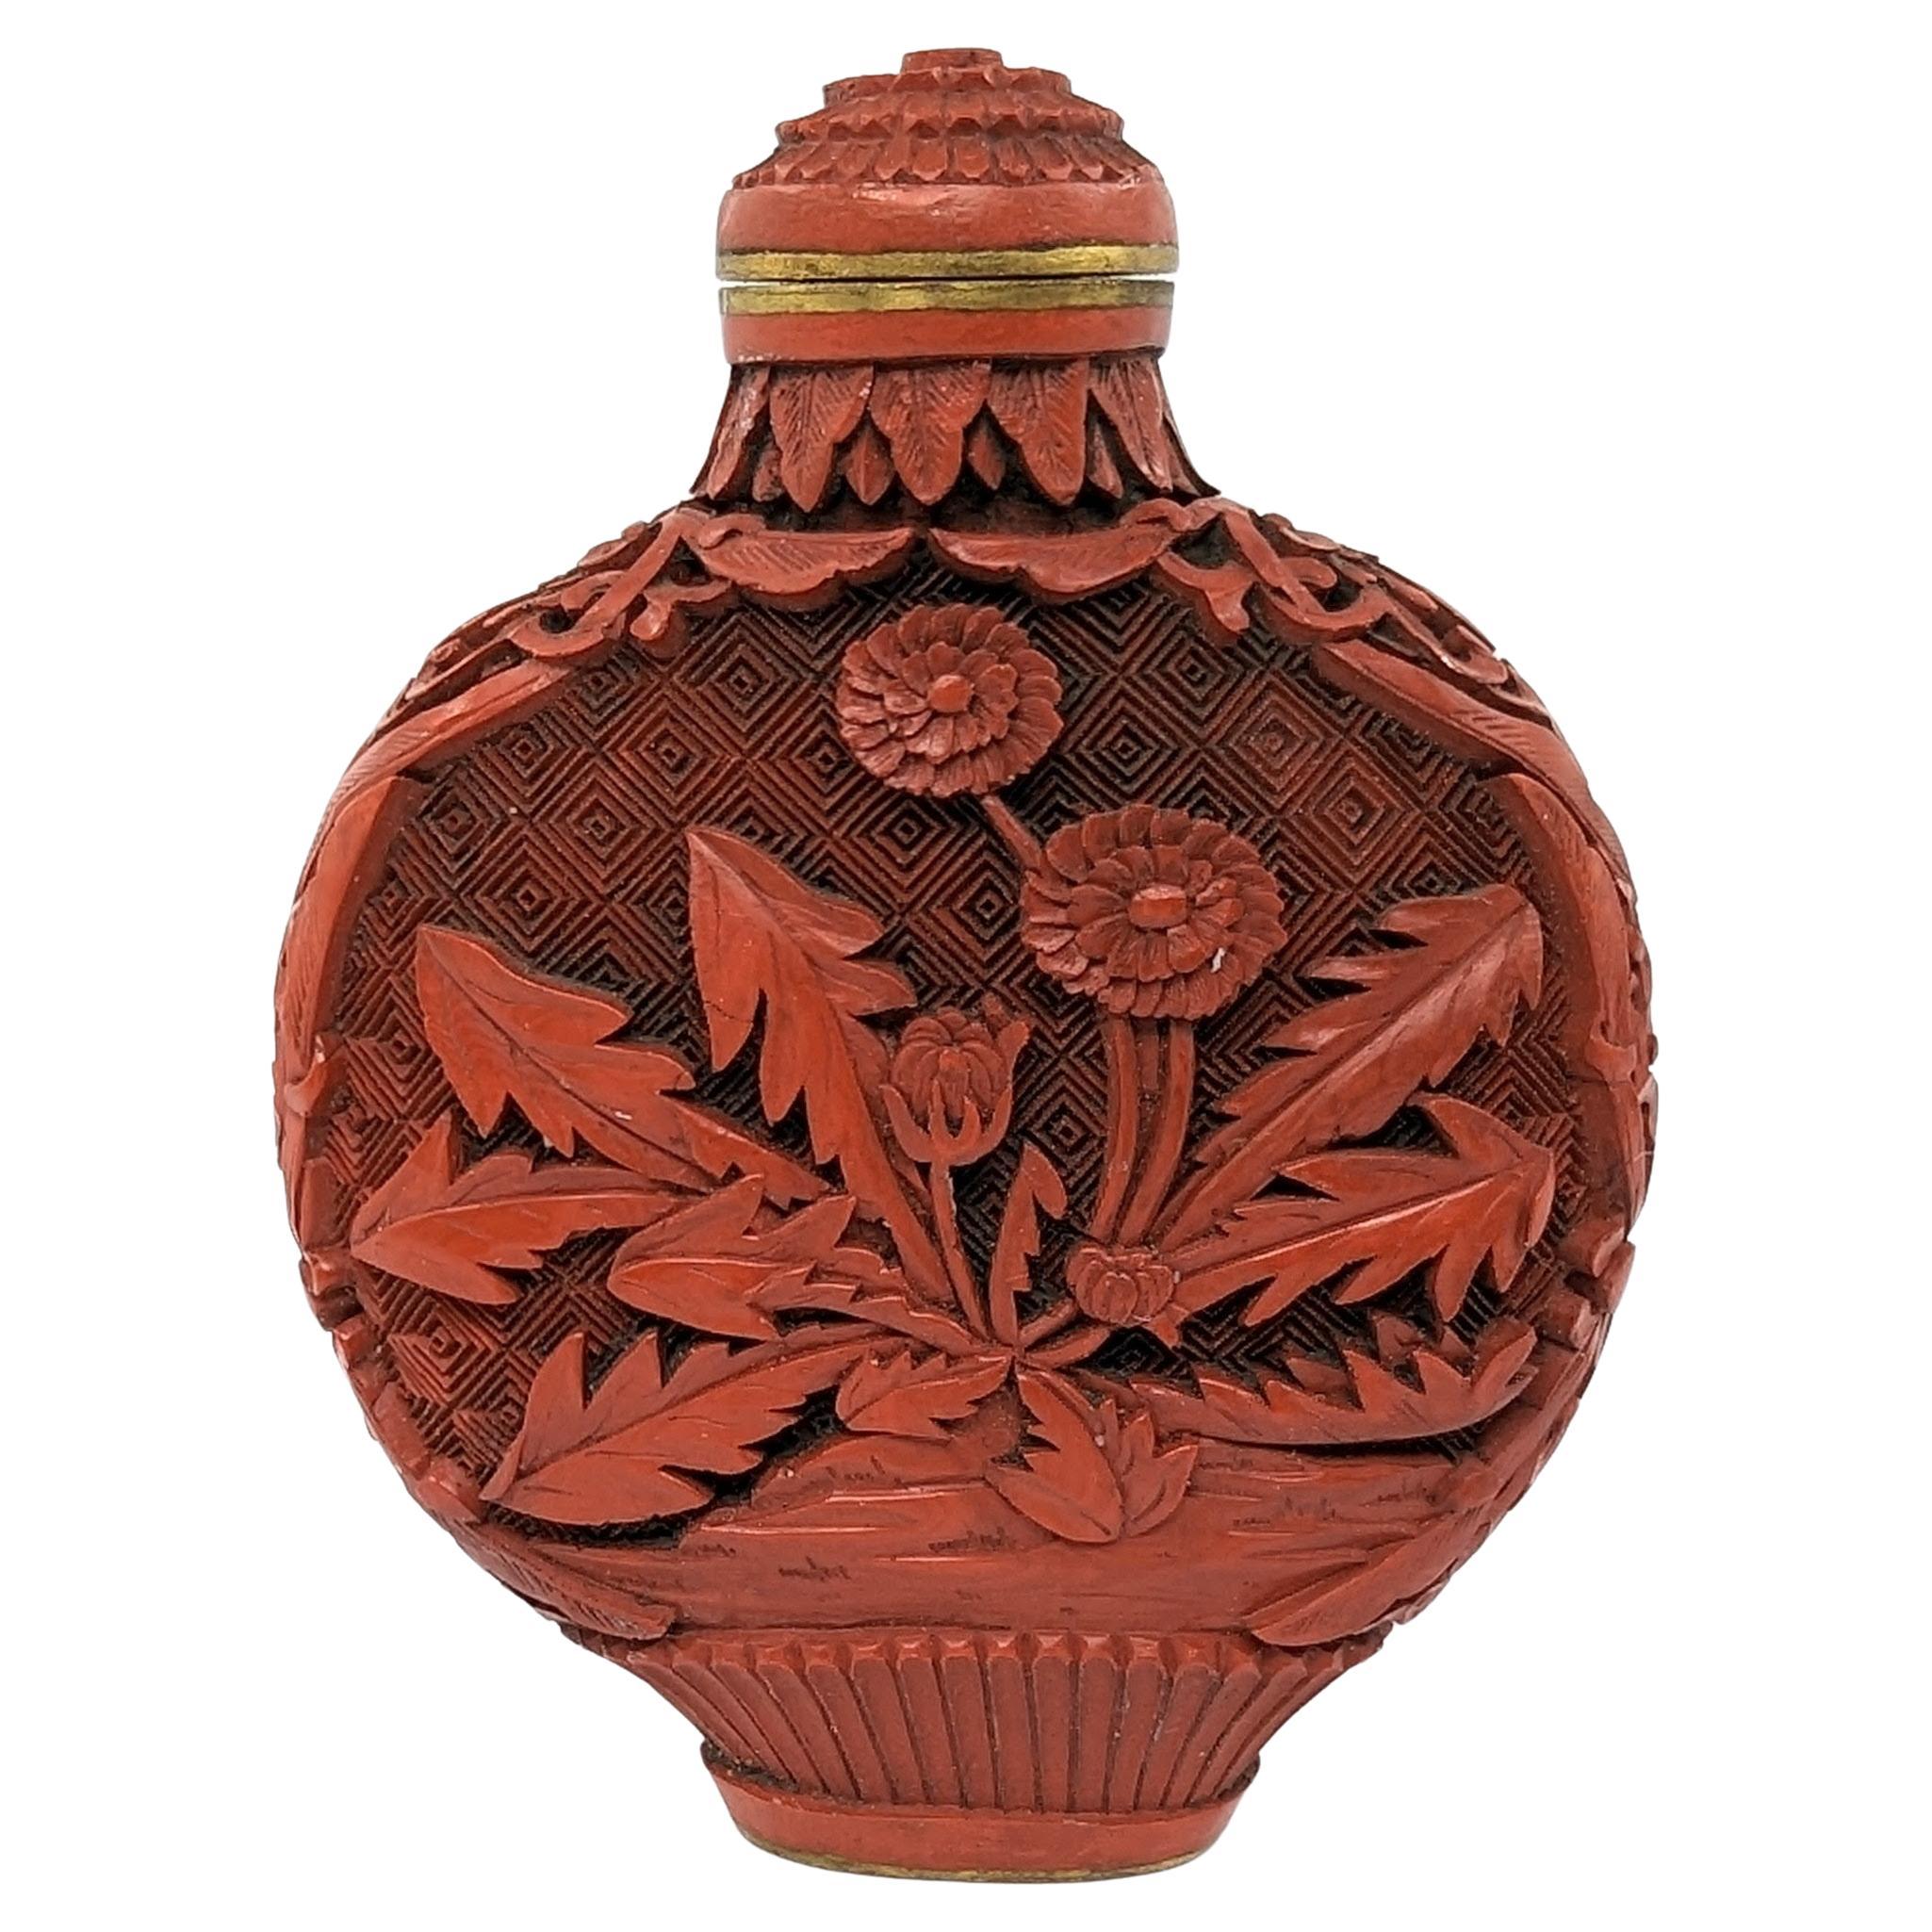 Antique Chinese red cinnabar lacquer snuff bottle of flattened globular form and well carved with chrysanthemums and flowers, matching cinnabar stopper, wooden spoon

18th to 19th Century Qing Dynasty